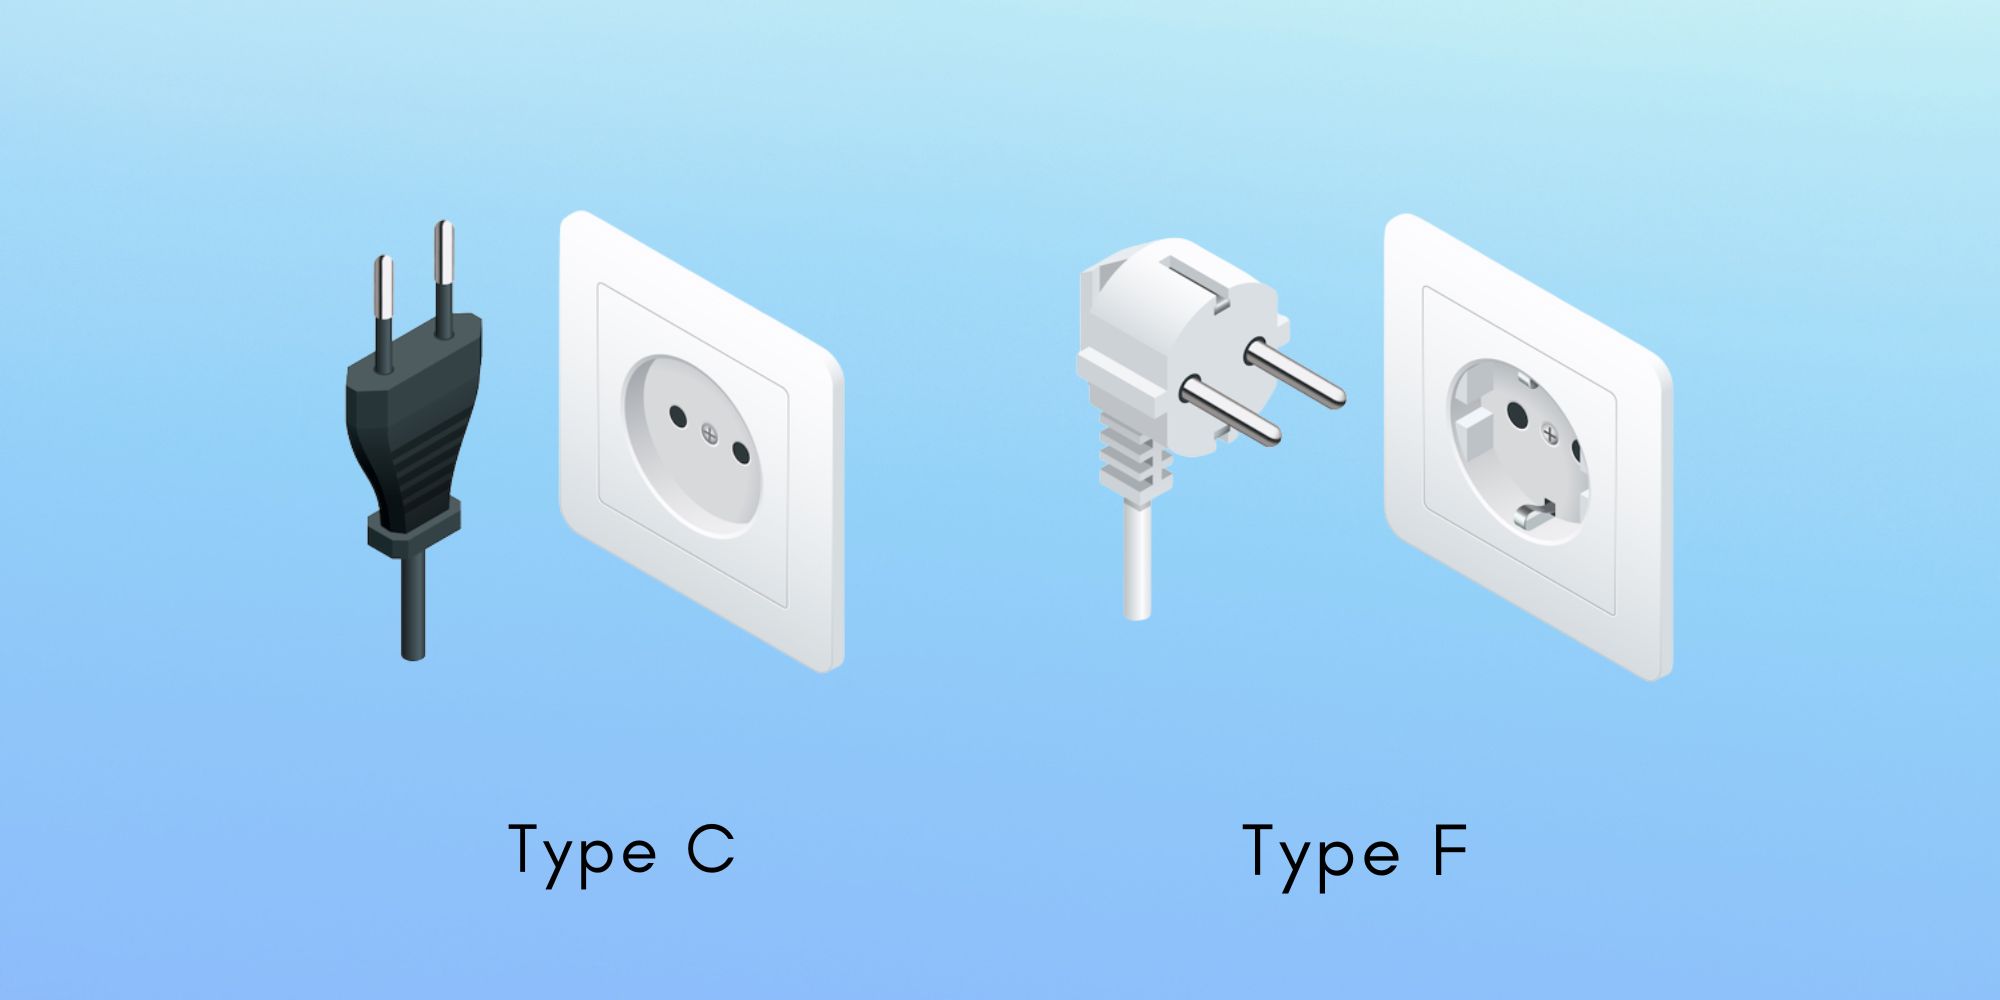 Croatia Power Plugs and Sockets: Type C and Type F
